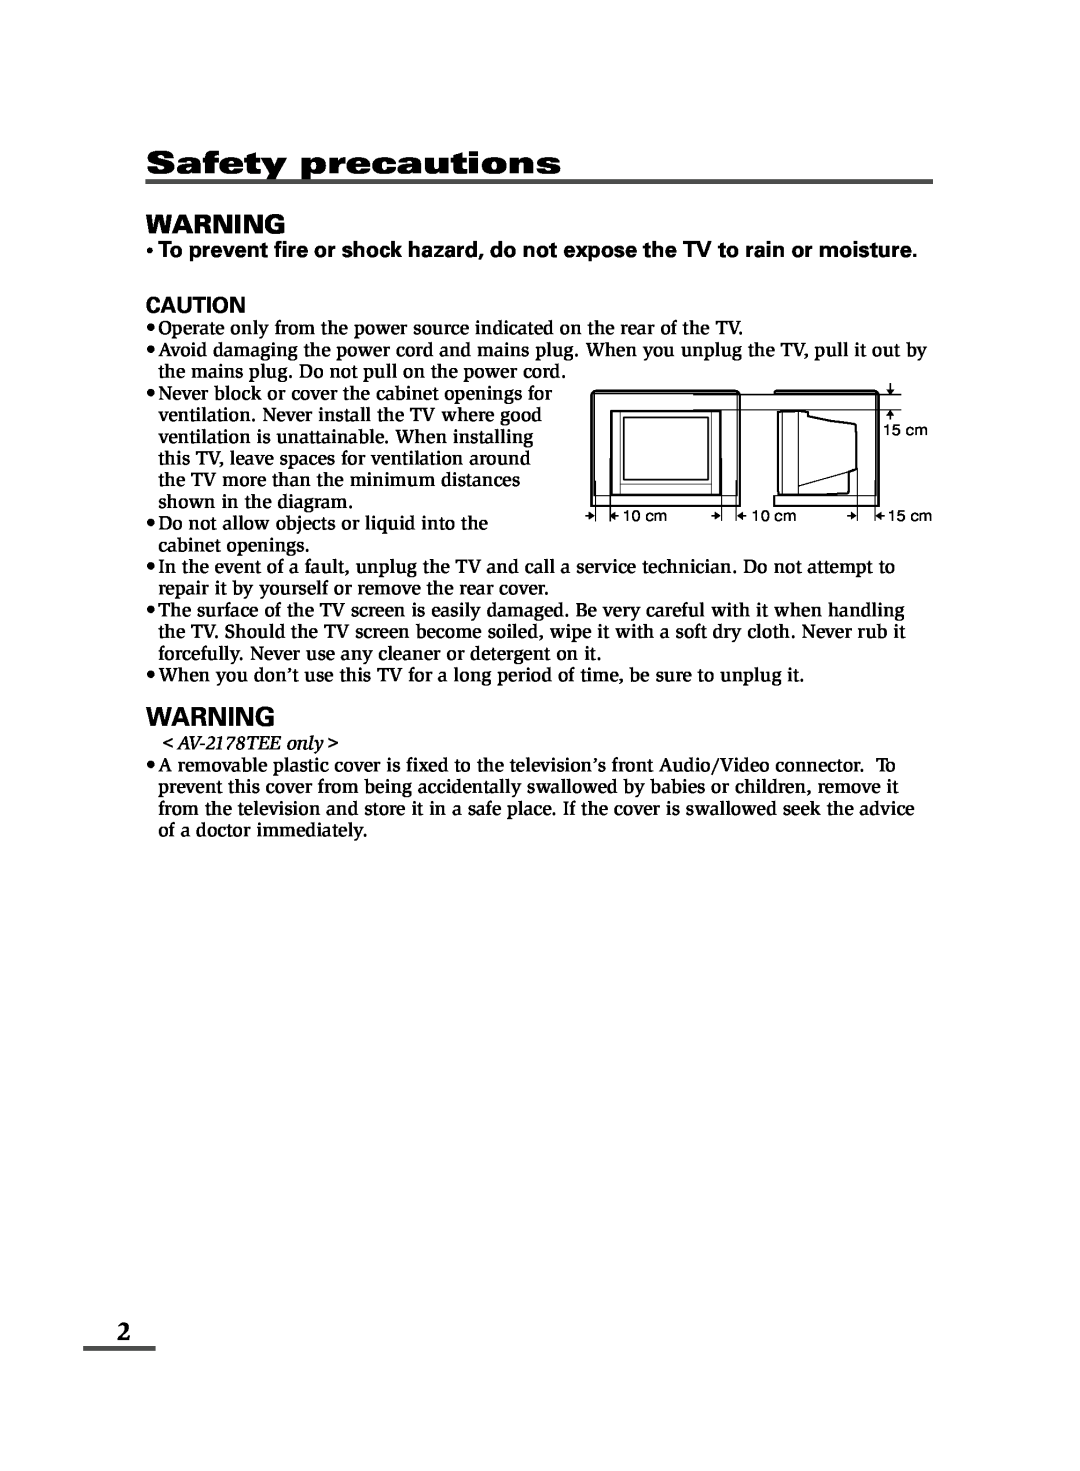 JVC specifications AV-2178TEE only, Safety precautions 